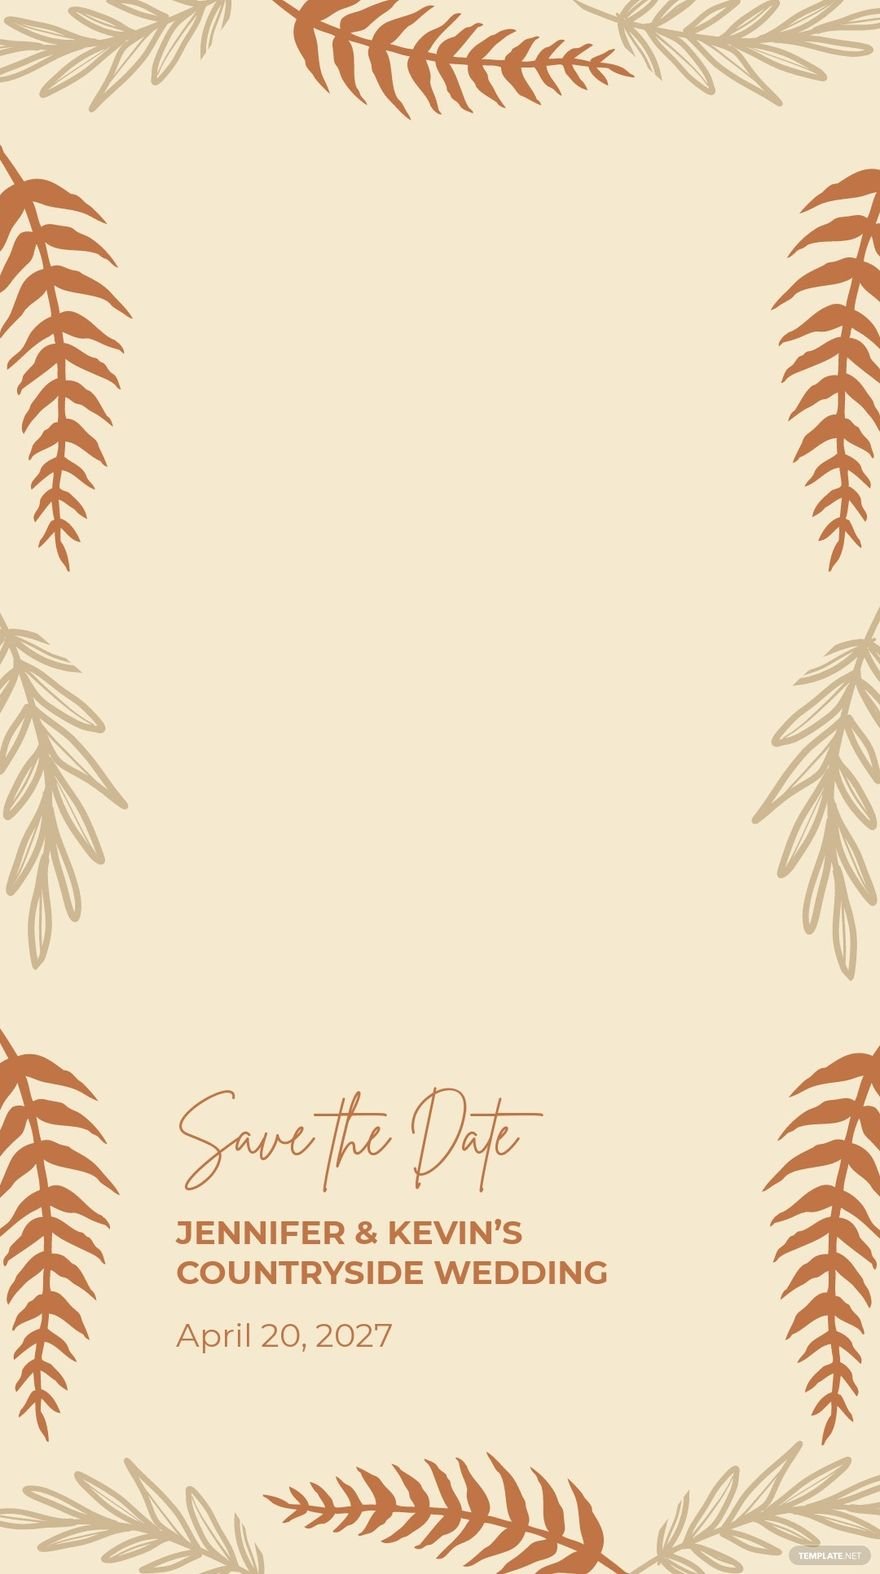 Rustic Save The Date Snapchat Geofilter